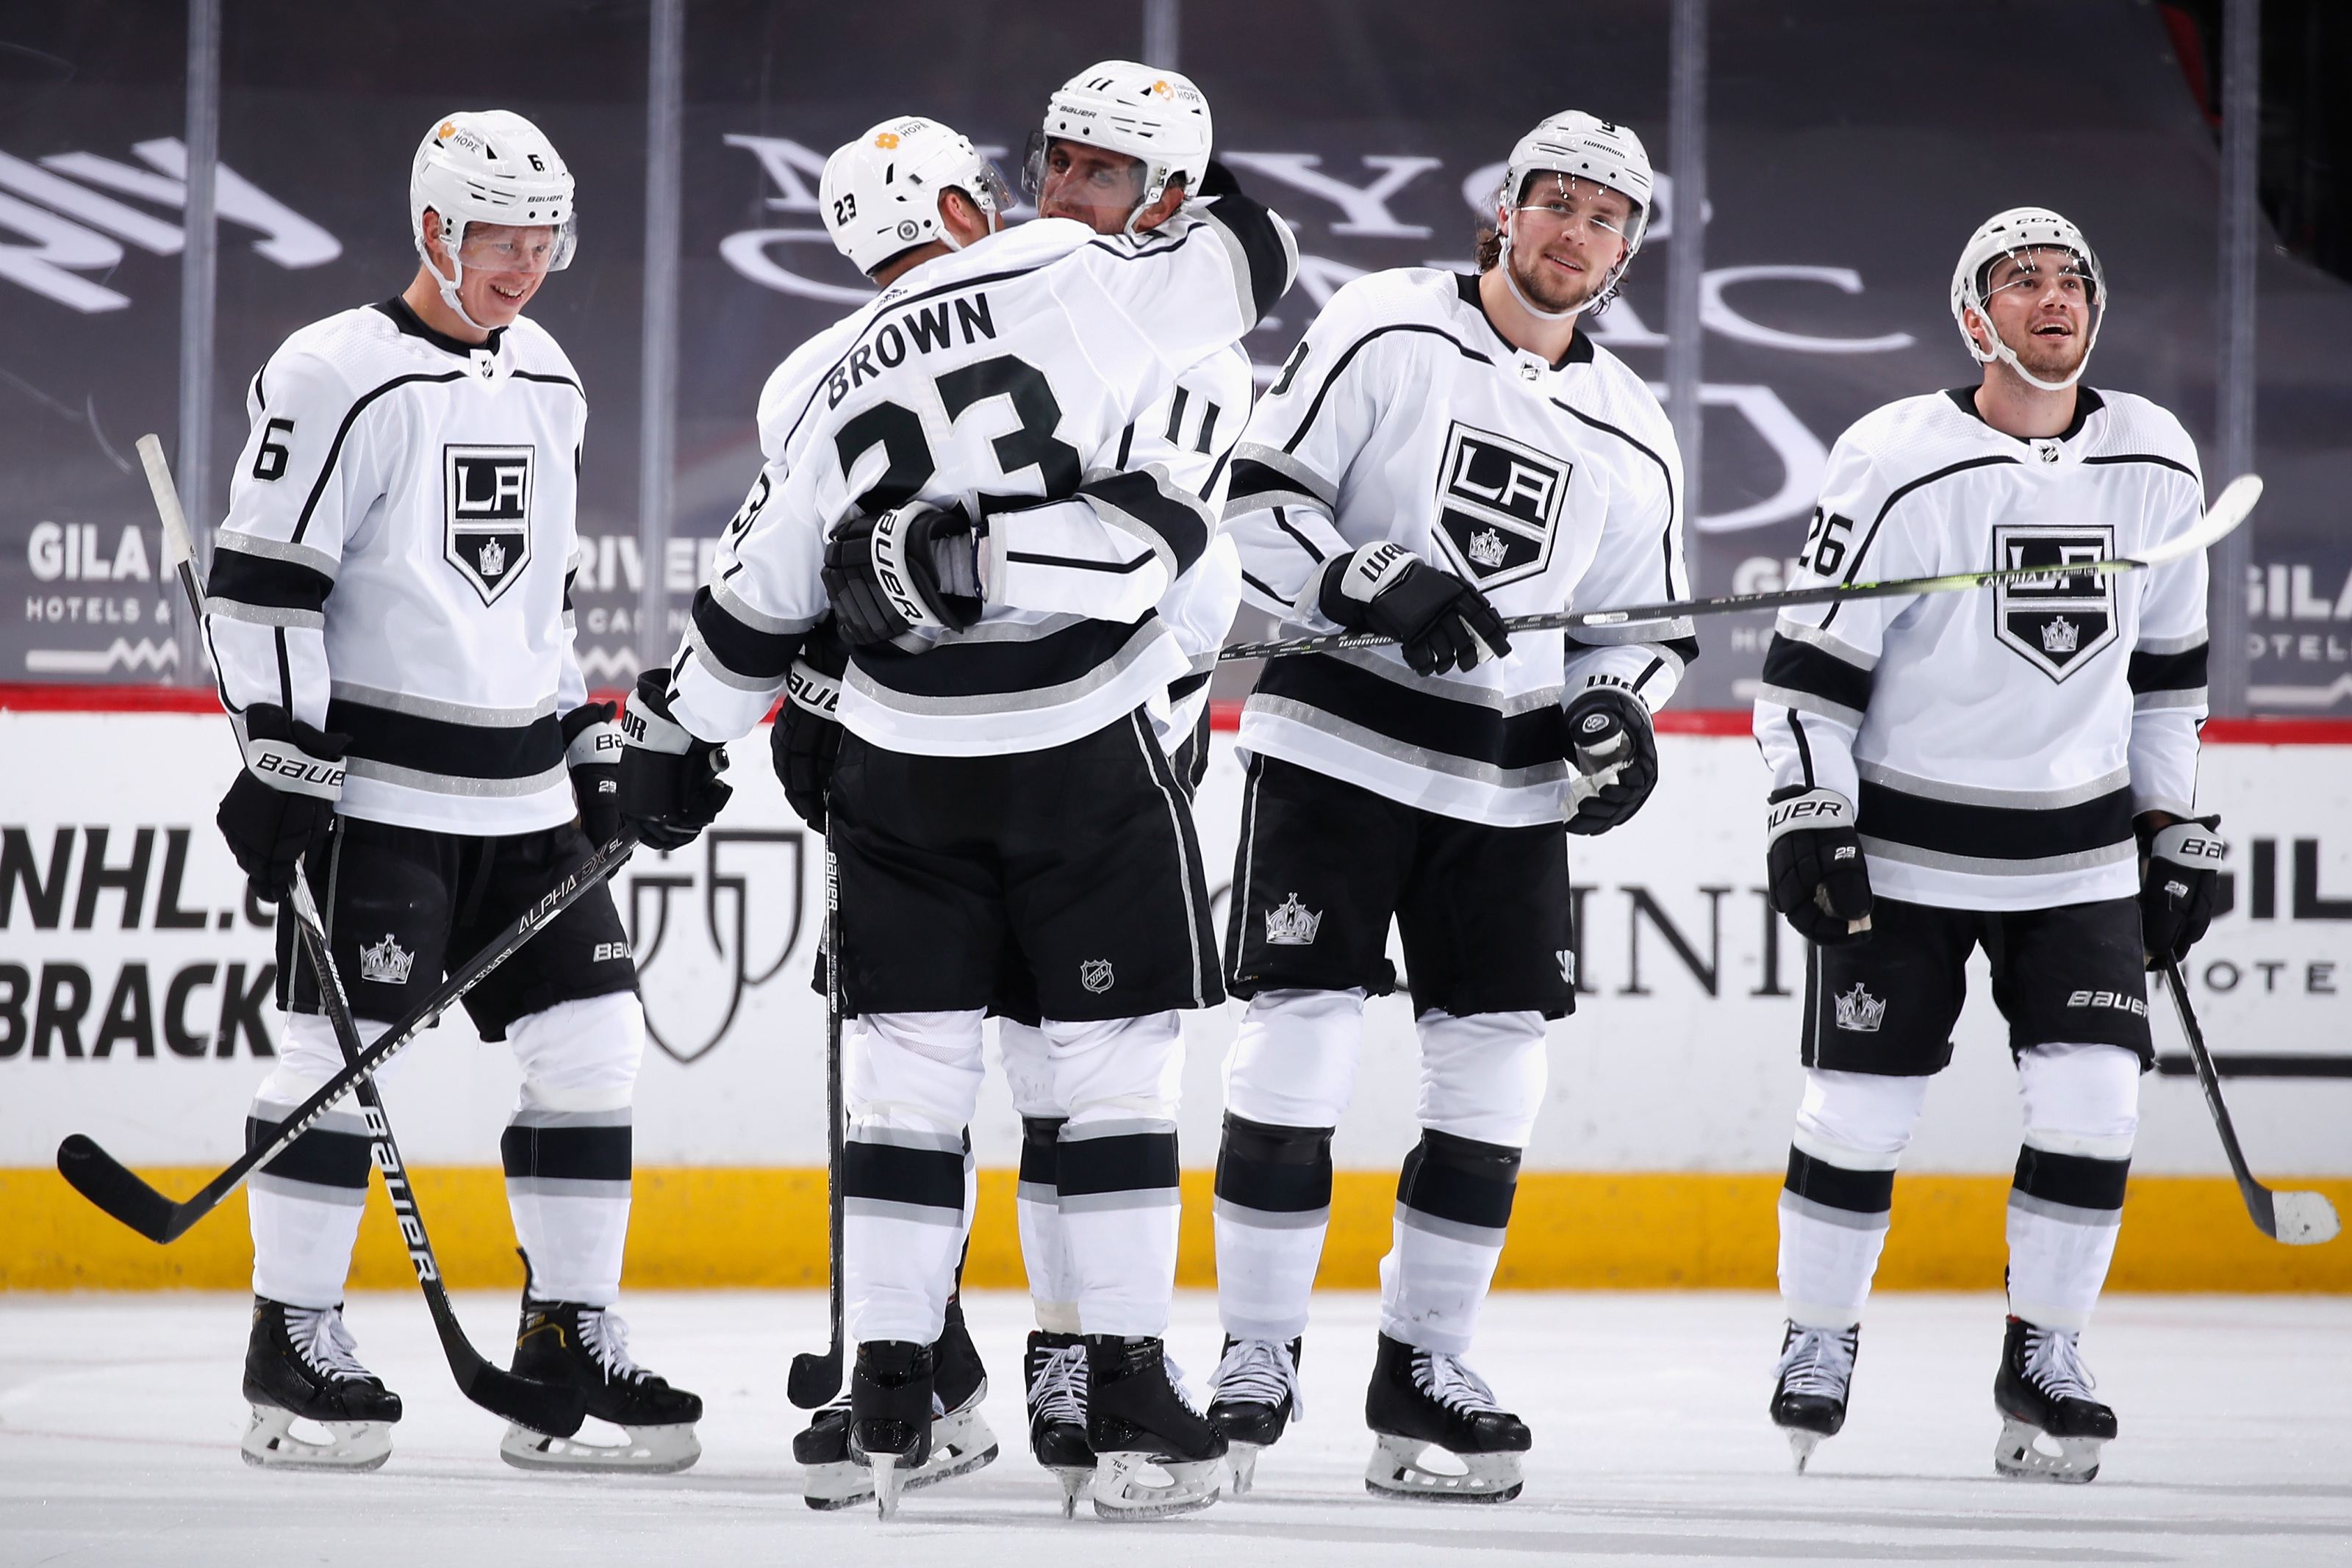 LA Kings - Anze Kopitar has joined the 1,000 Games Played Club